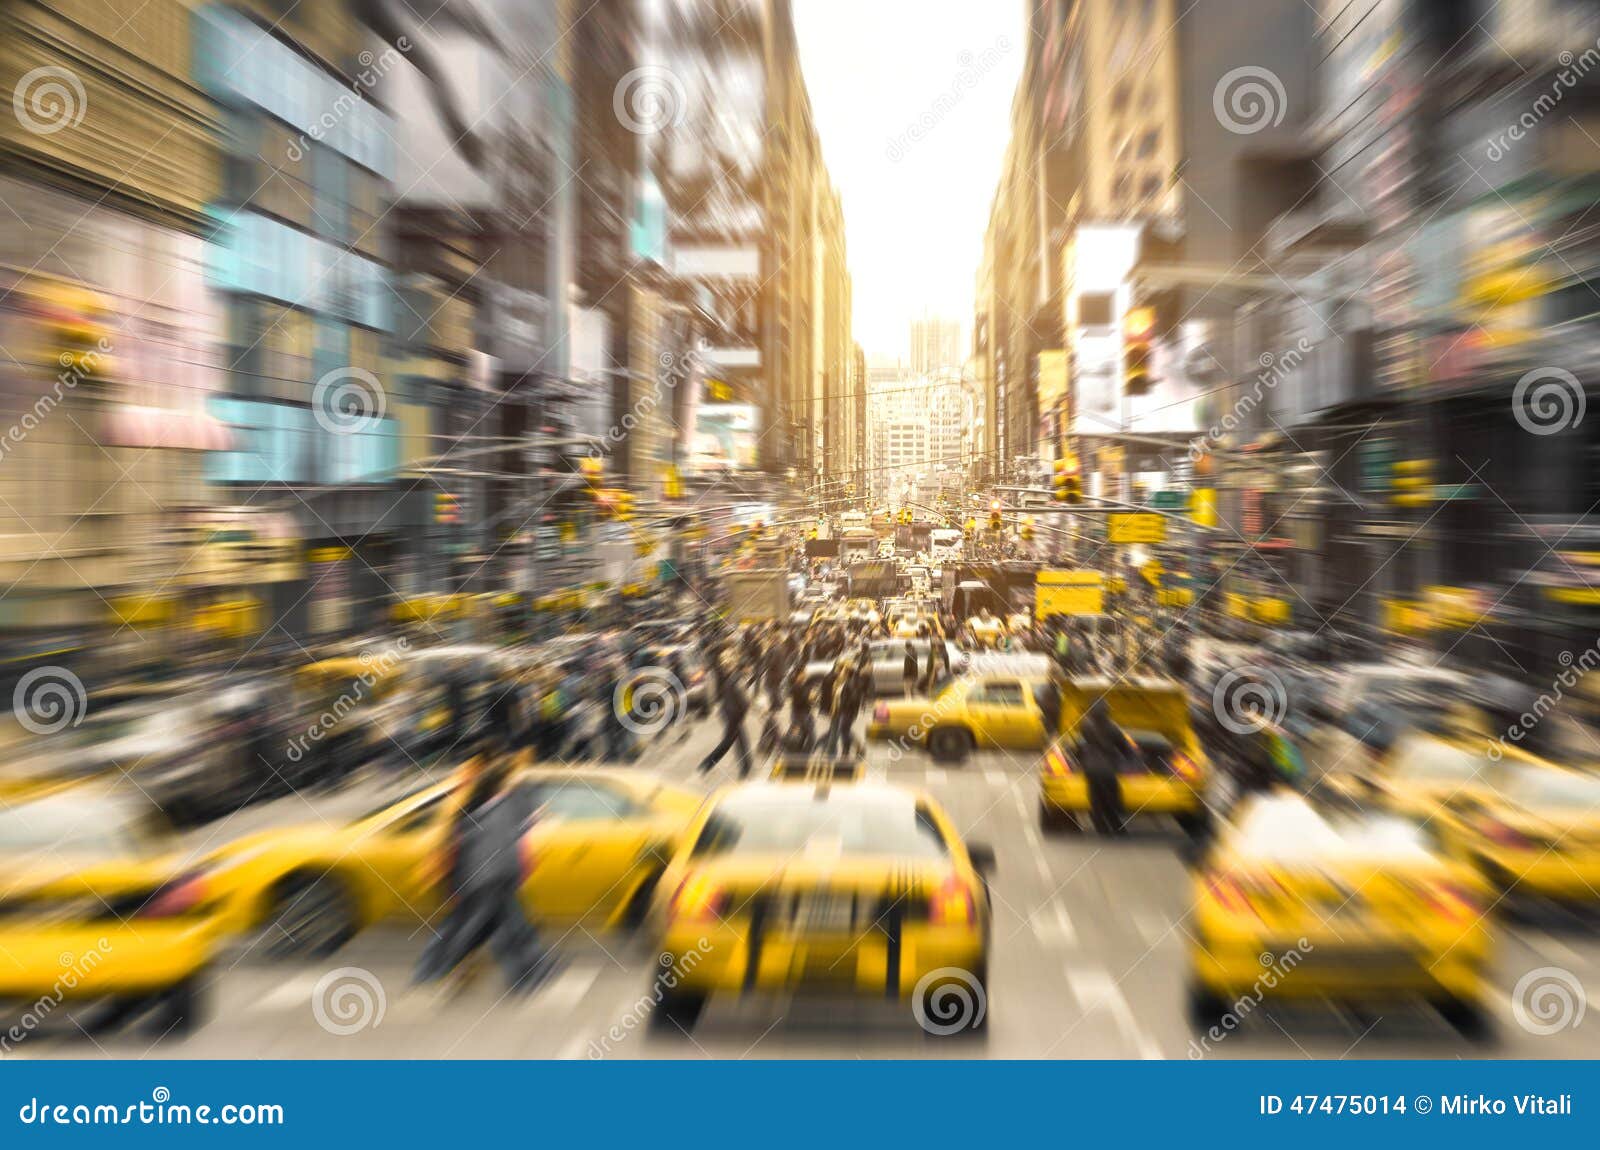 rush hour with yellow taxi cabs in manhattan new york city